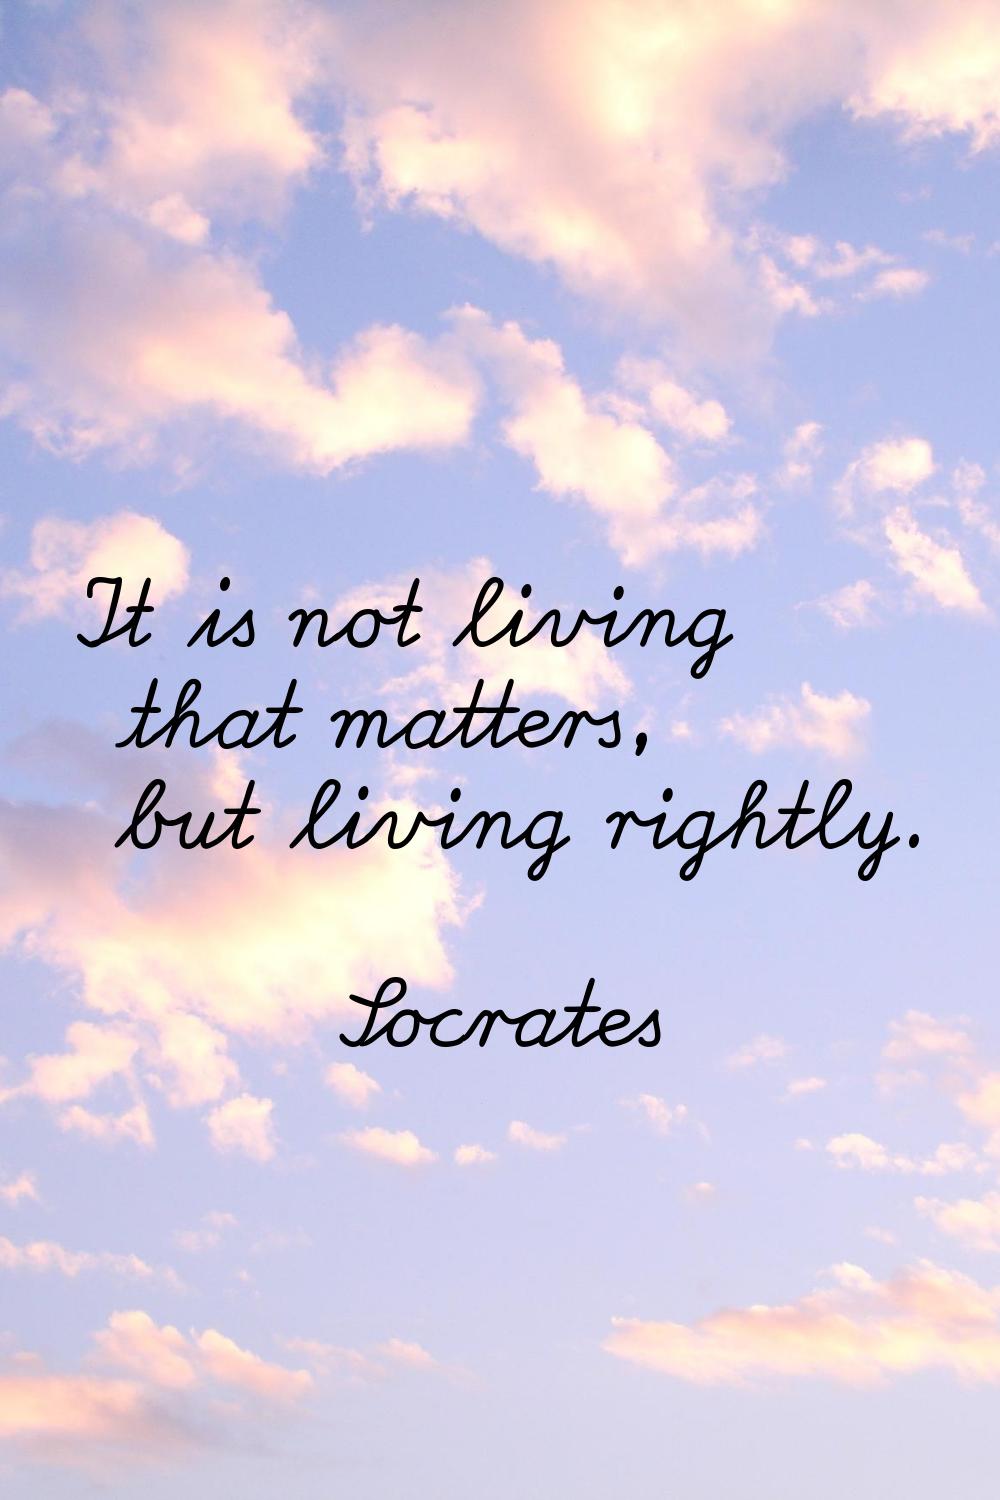 It is not living that matters, but living rightly.